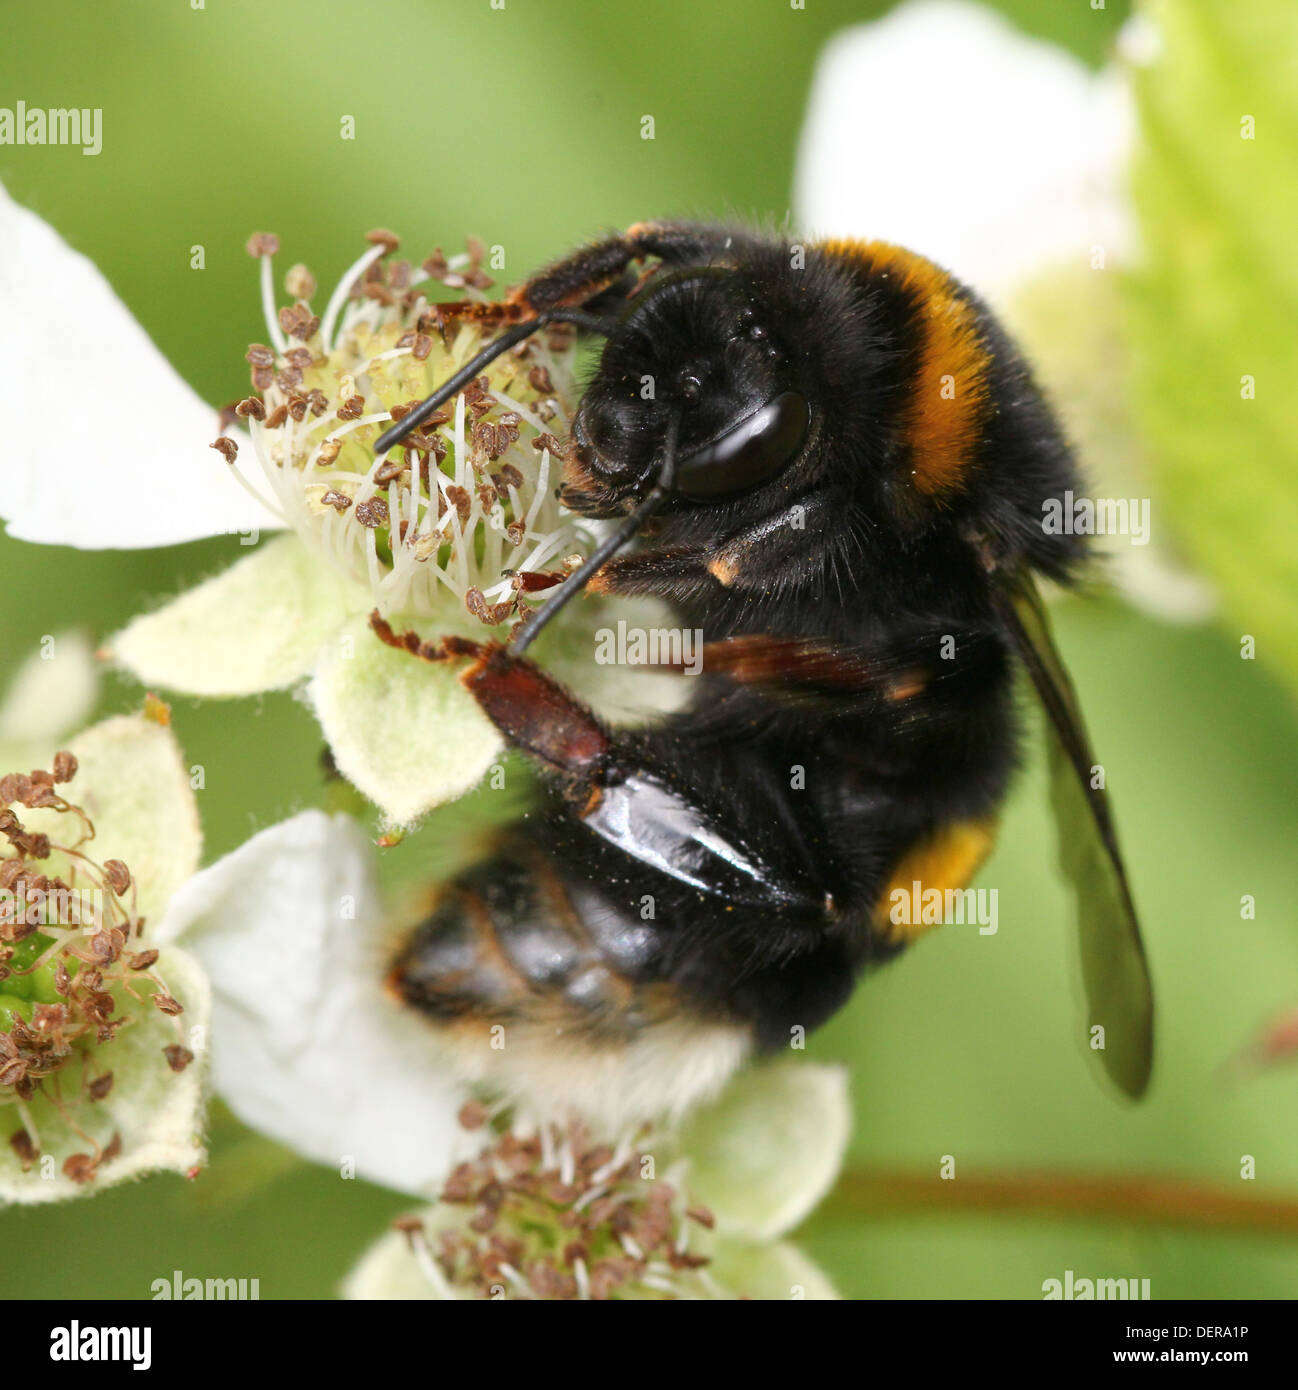 Large earth Bumble-bee or Buff-tailed bumblebee (Bombus terrestris) feeding & posing on a flower & a leaf (24 images in series) Stock Photo